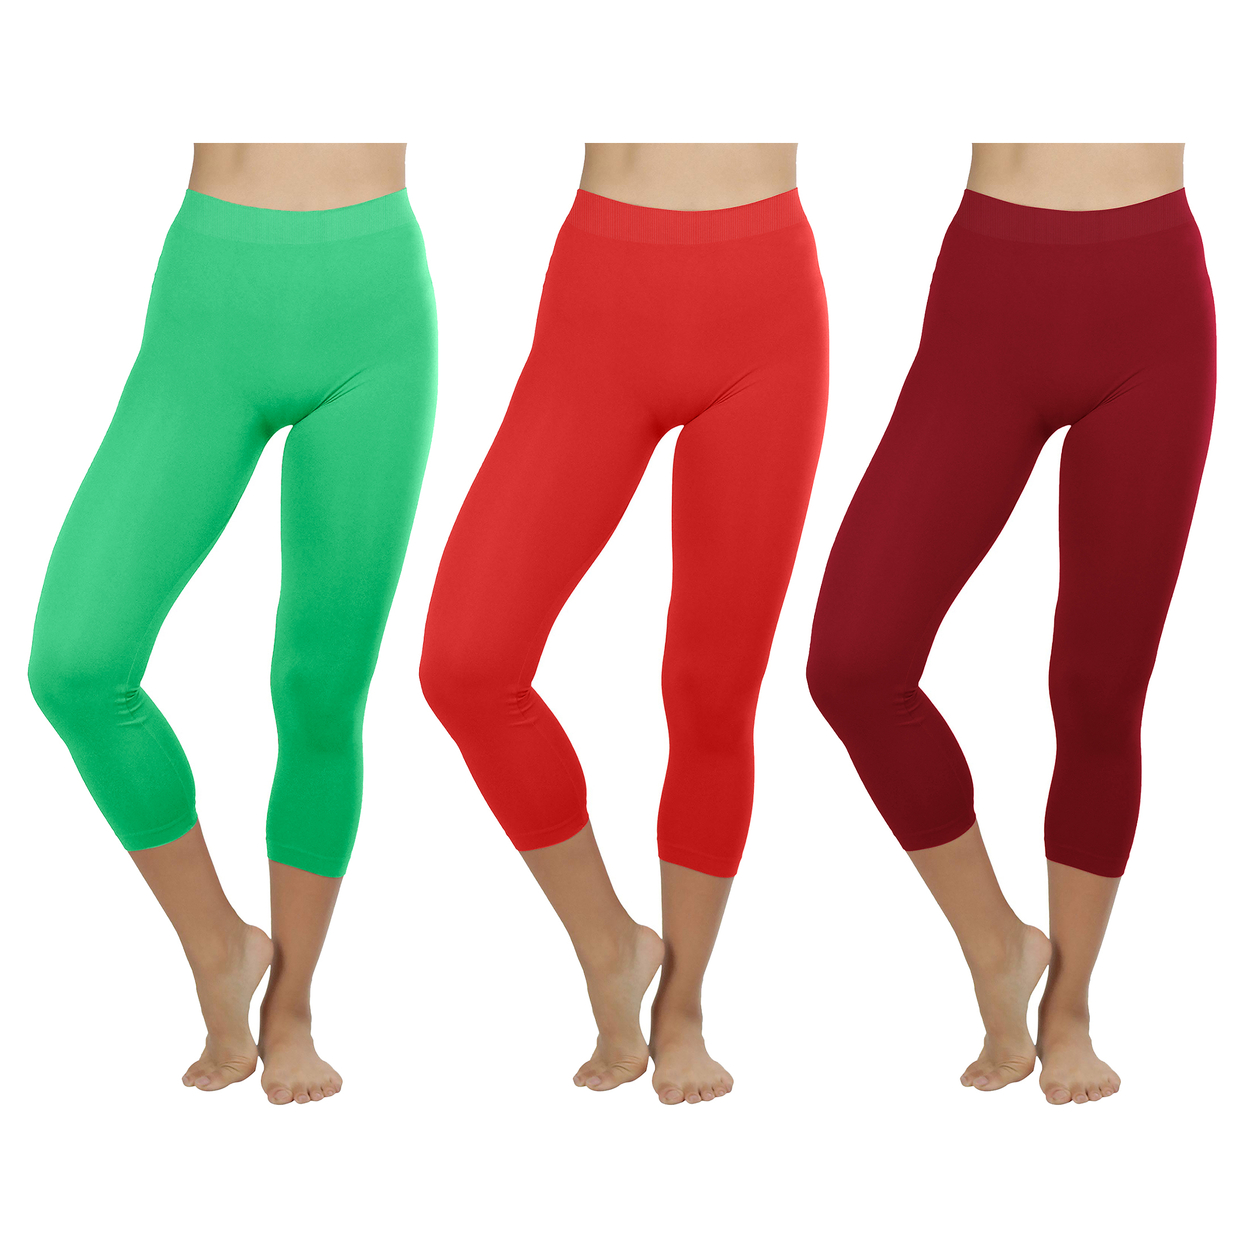 2-Pack: Women's Ultra-Soft High Waisted Smooth Stretch Active Yoga Capri Leggings - Red & Red, Small